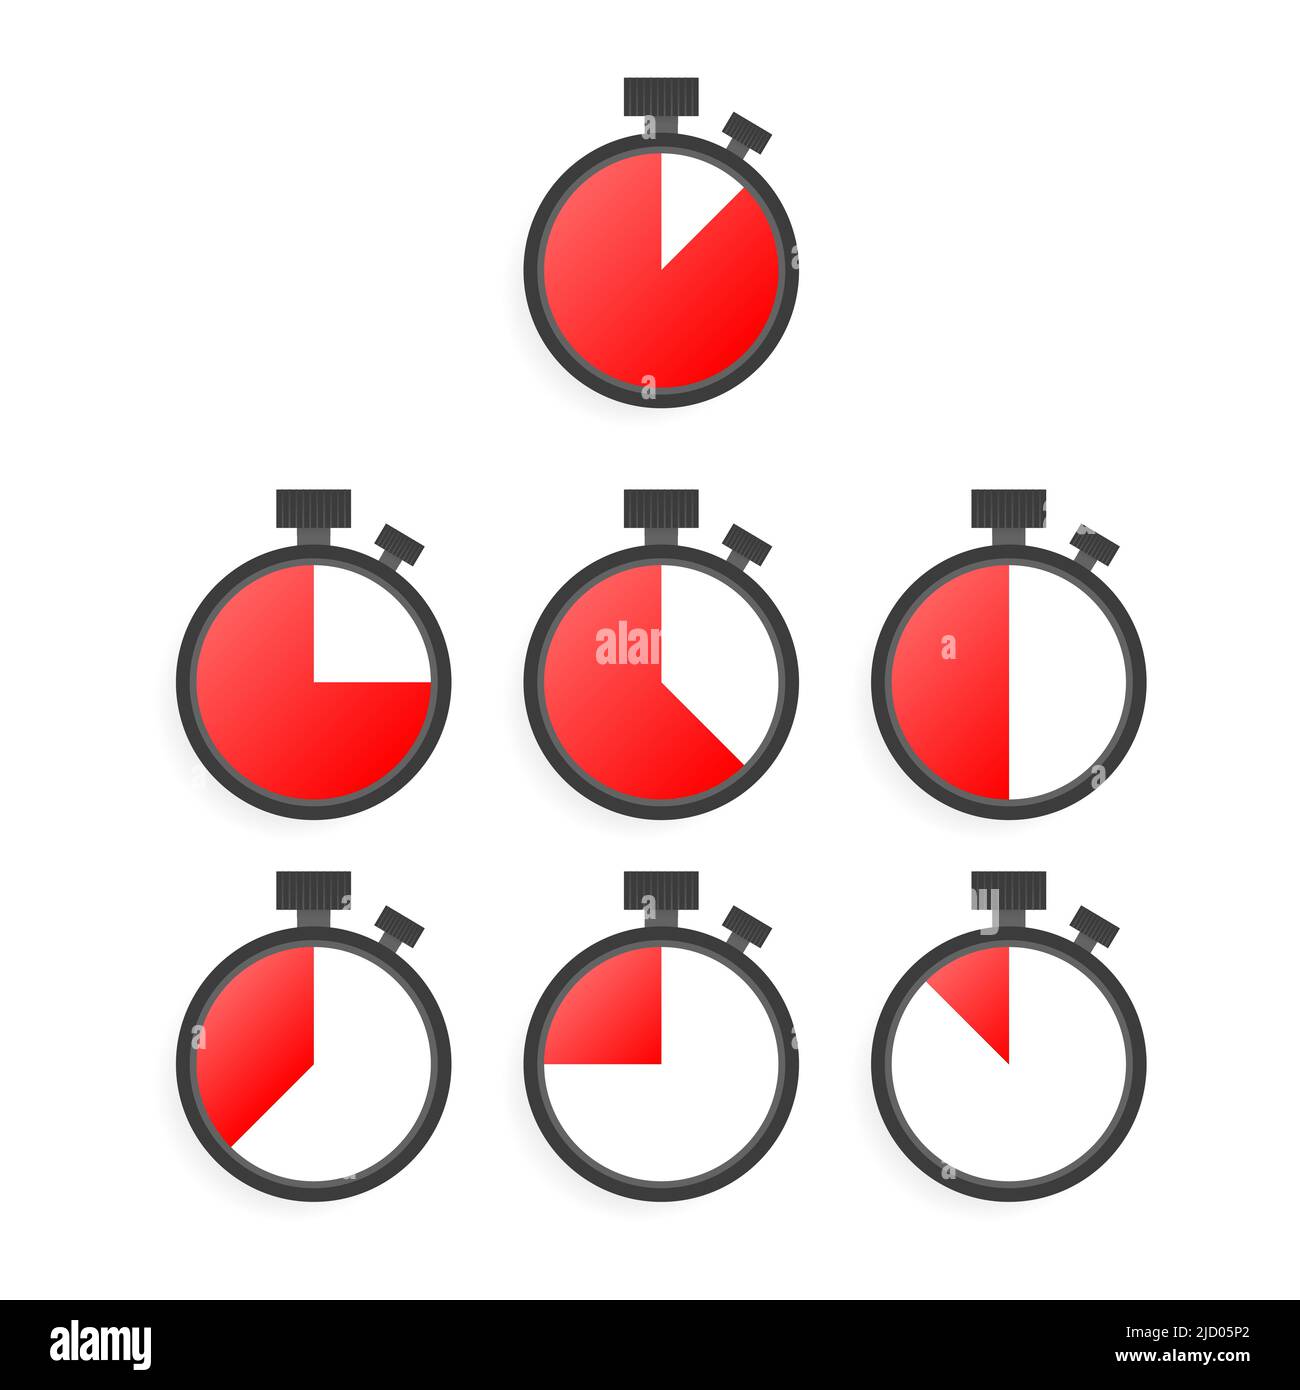 Set of simple timers on white background. Different time on timers. Vector illustration. Stock Vector